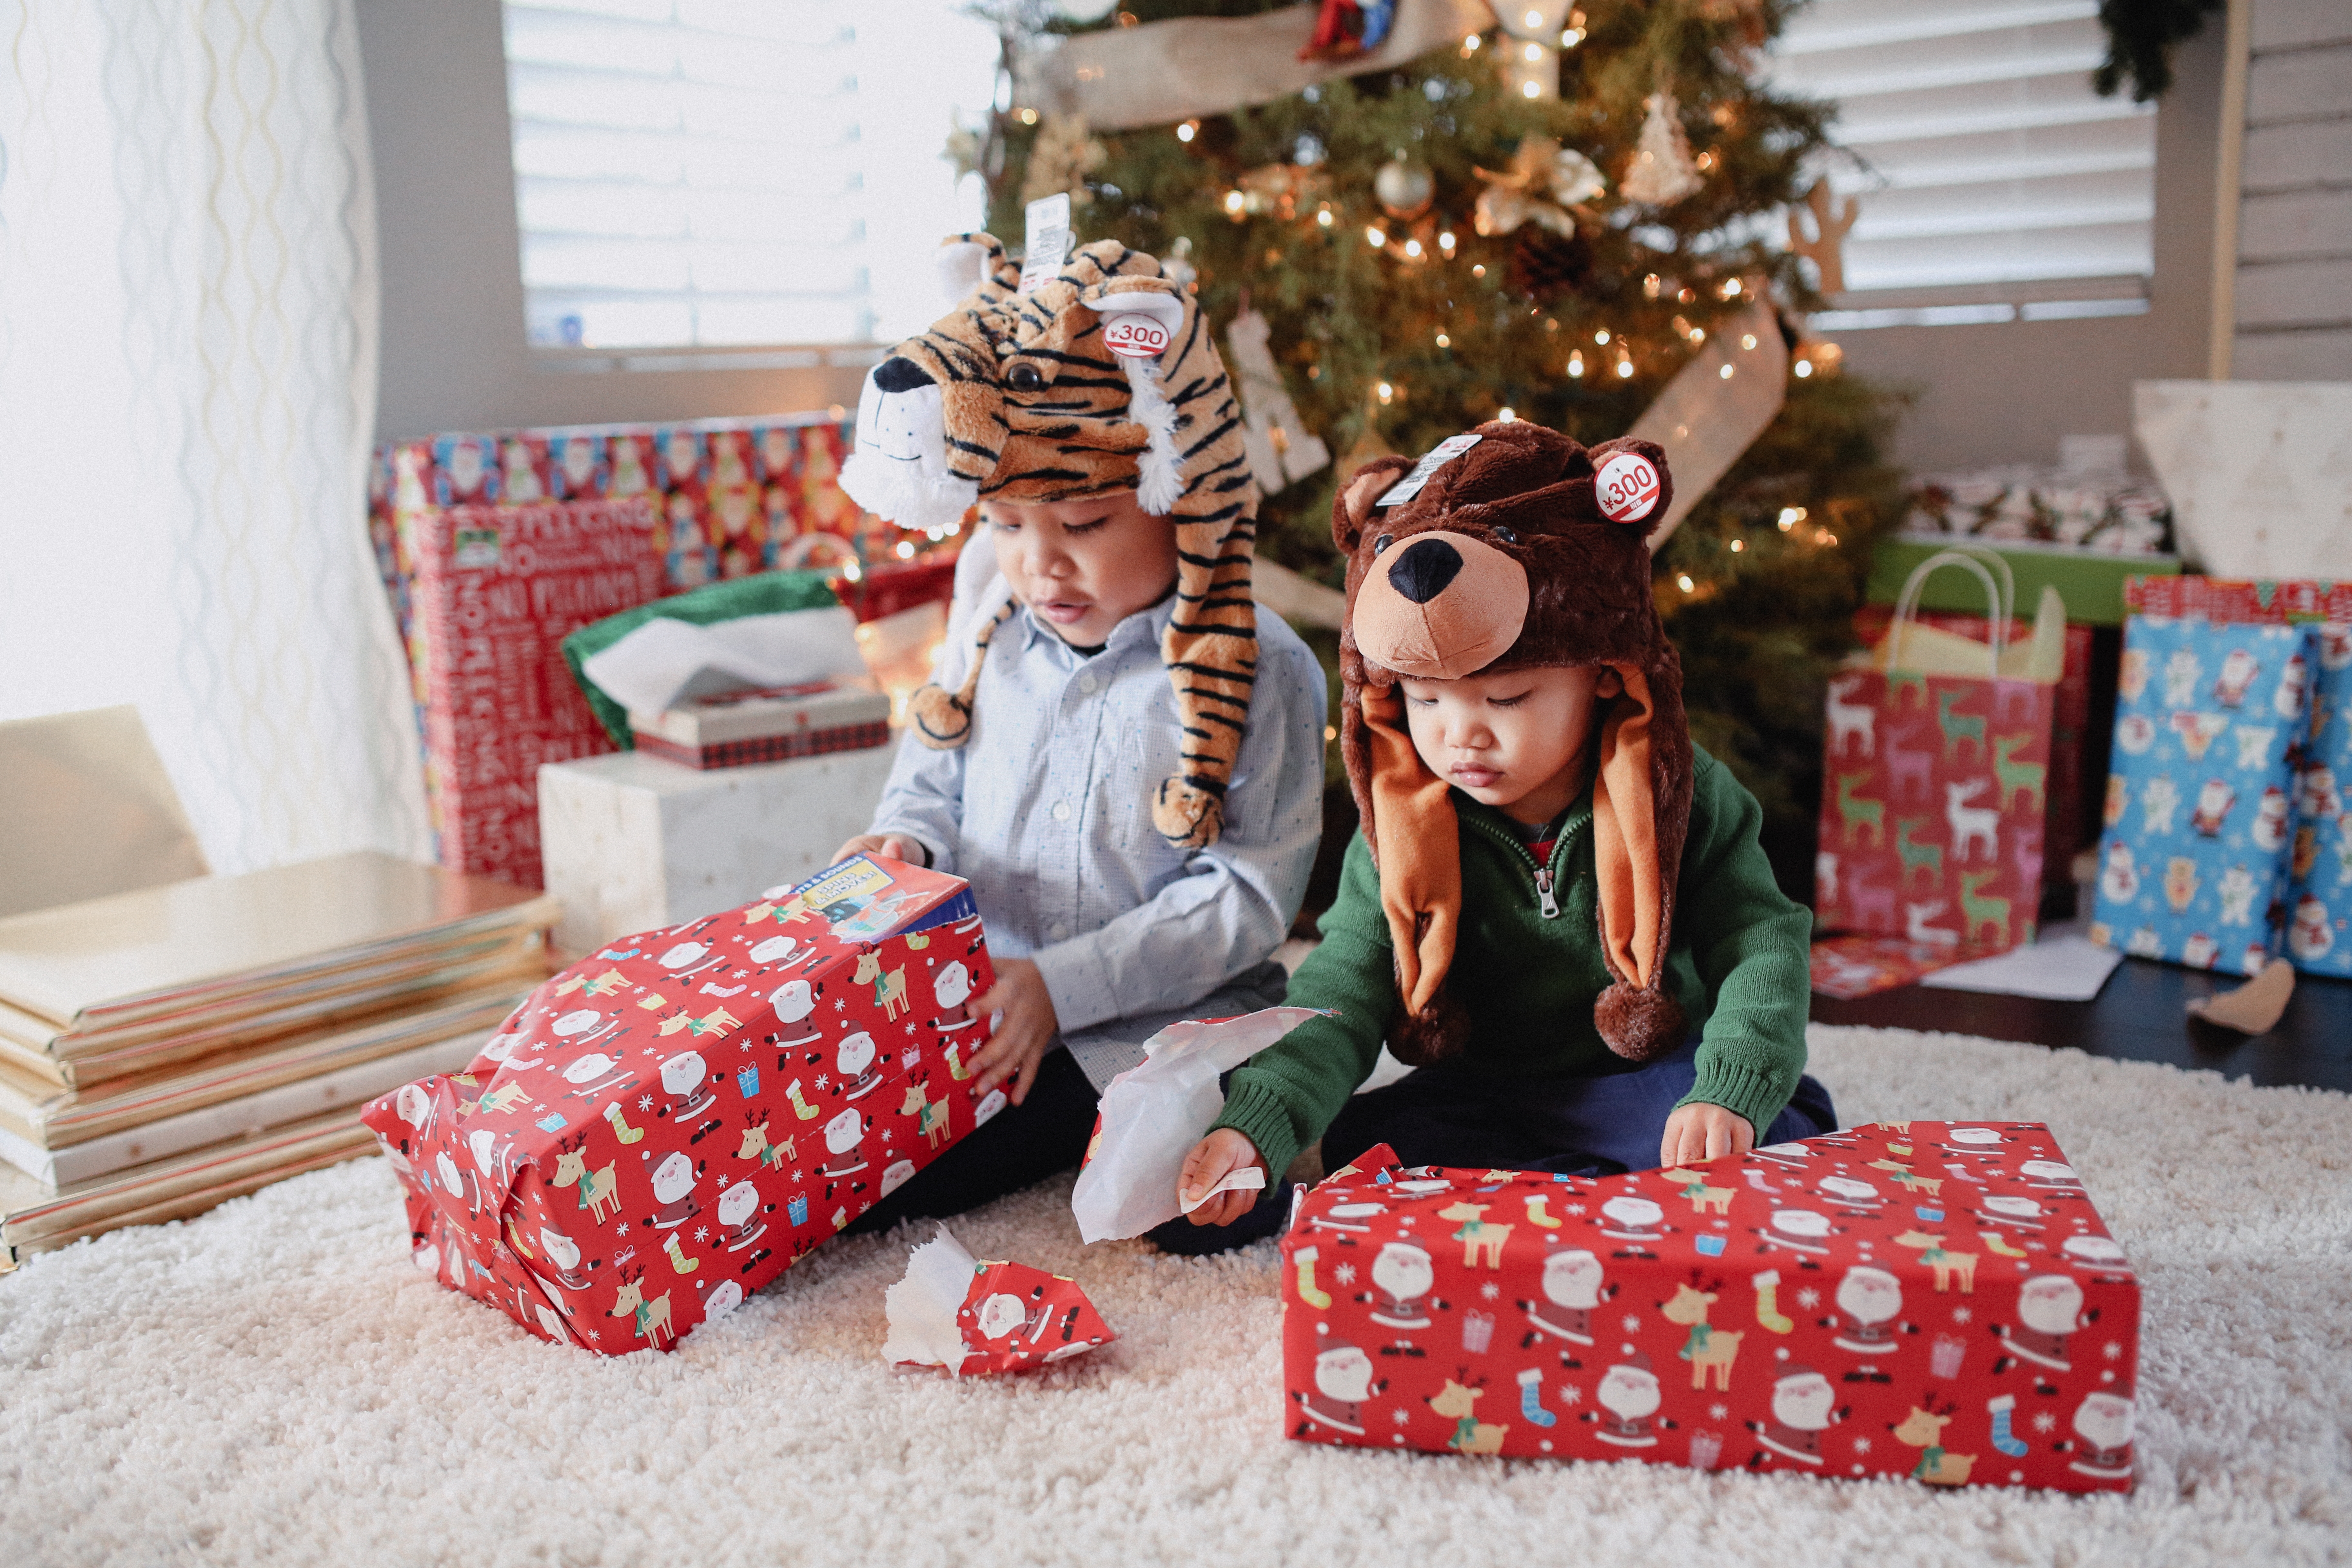 HOLIDAY GIFT GUIDE 2020 | GIFTS FOR EVERYONE ON YOUR LIST 2